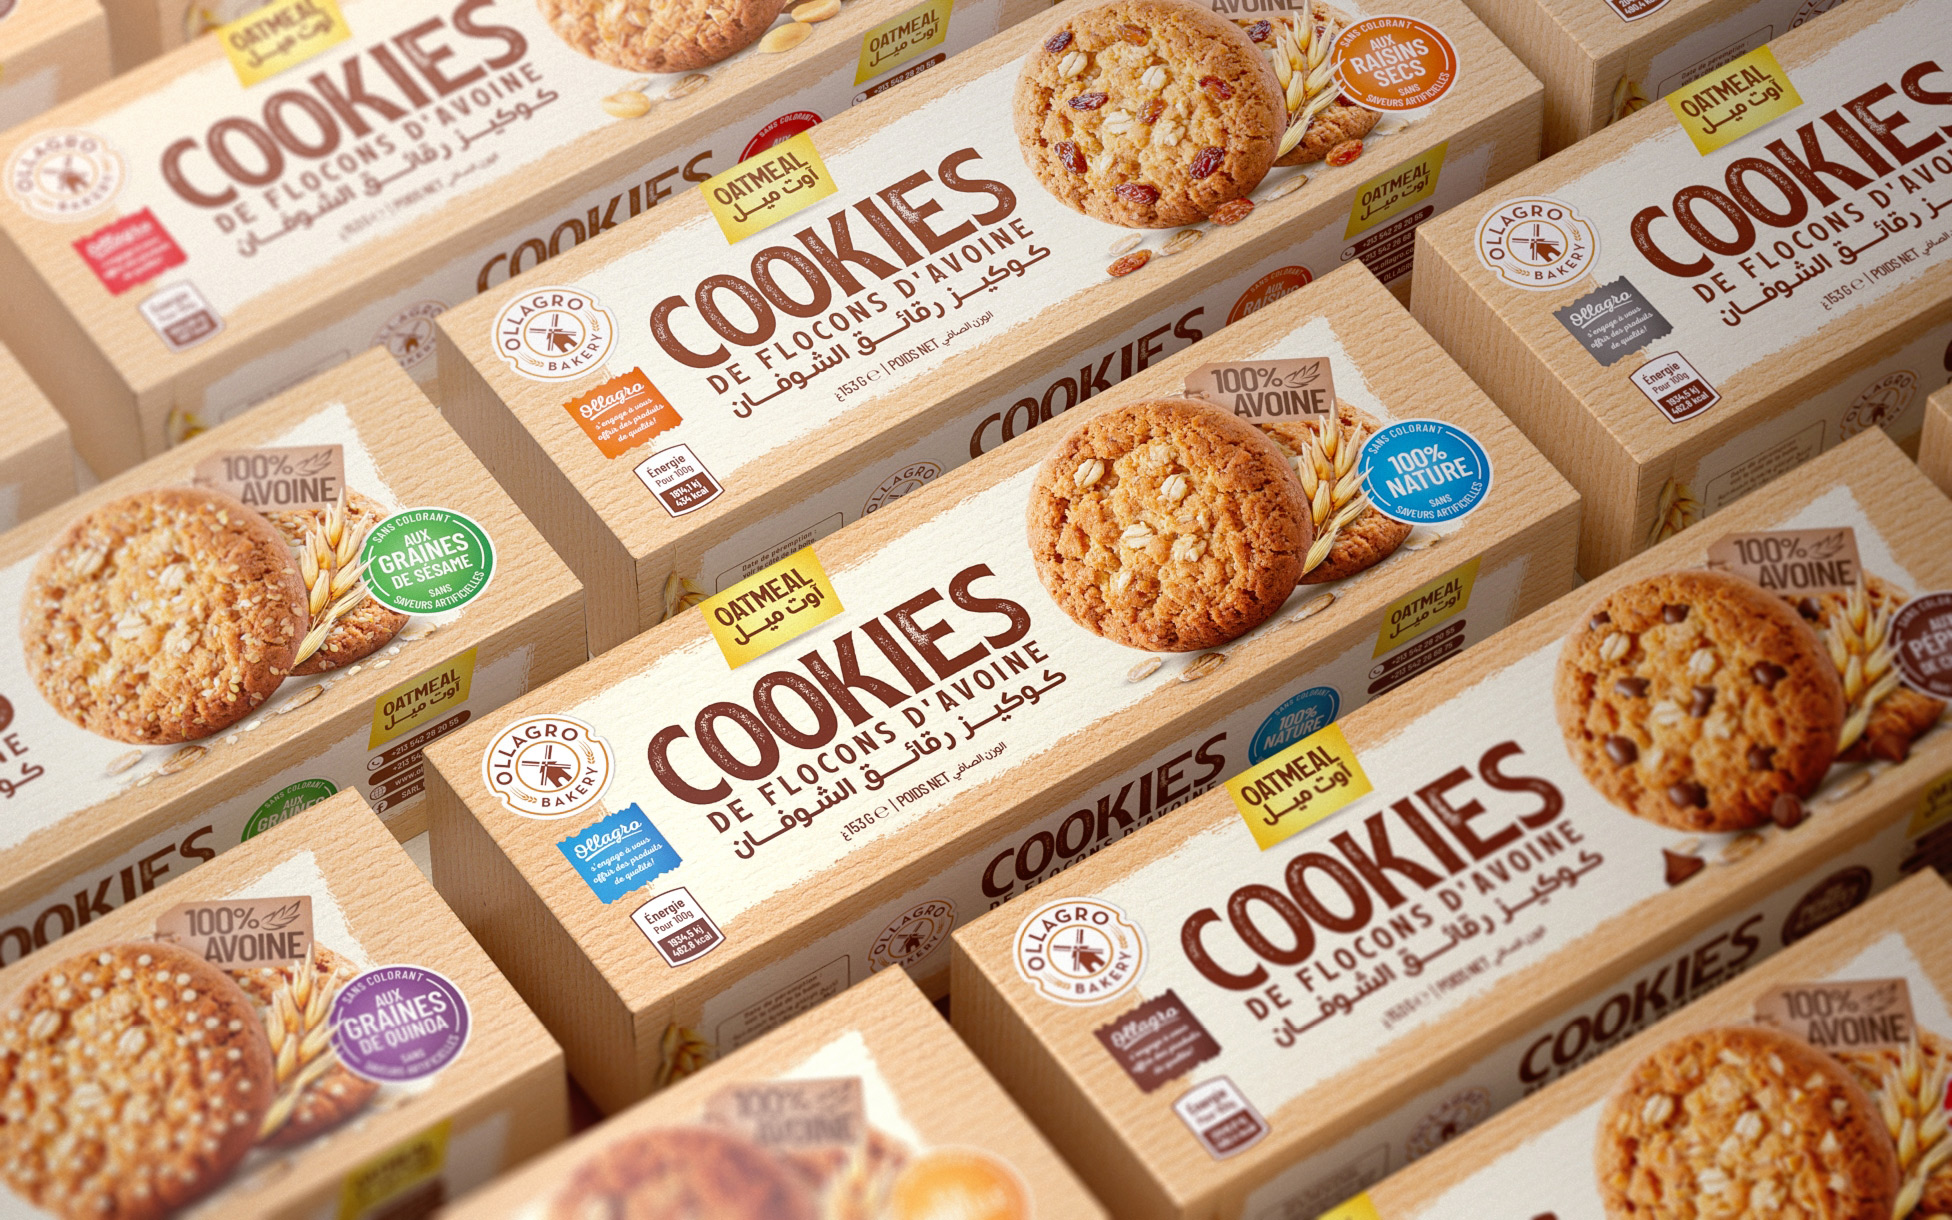 Elevating Tradition: Ollagro Bakery’s Artisanal Packaging Design for ‘Oatmeal’ Cookies